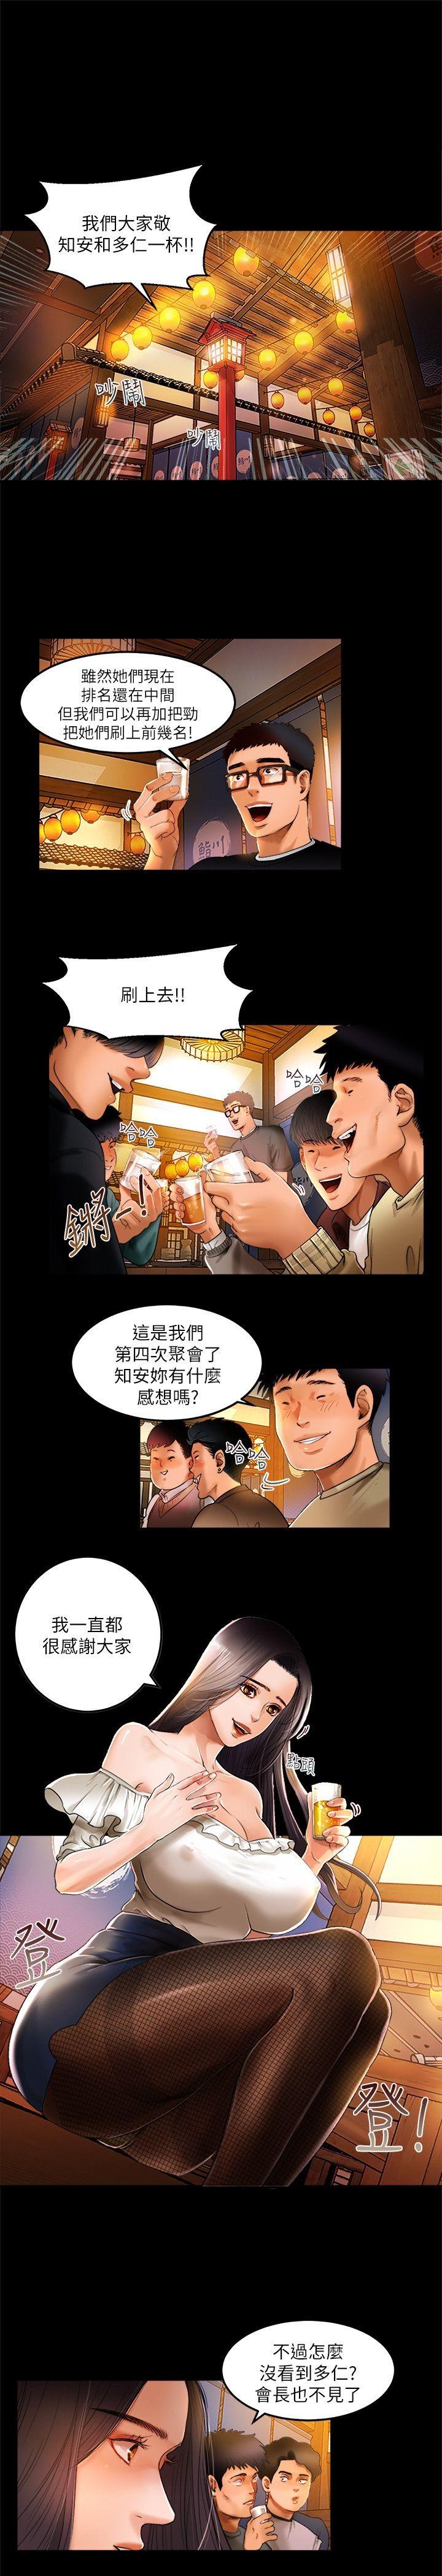 Tanned 干爹我还要1-24话 Guy - Page 3